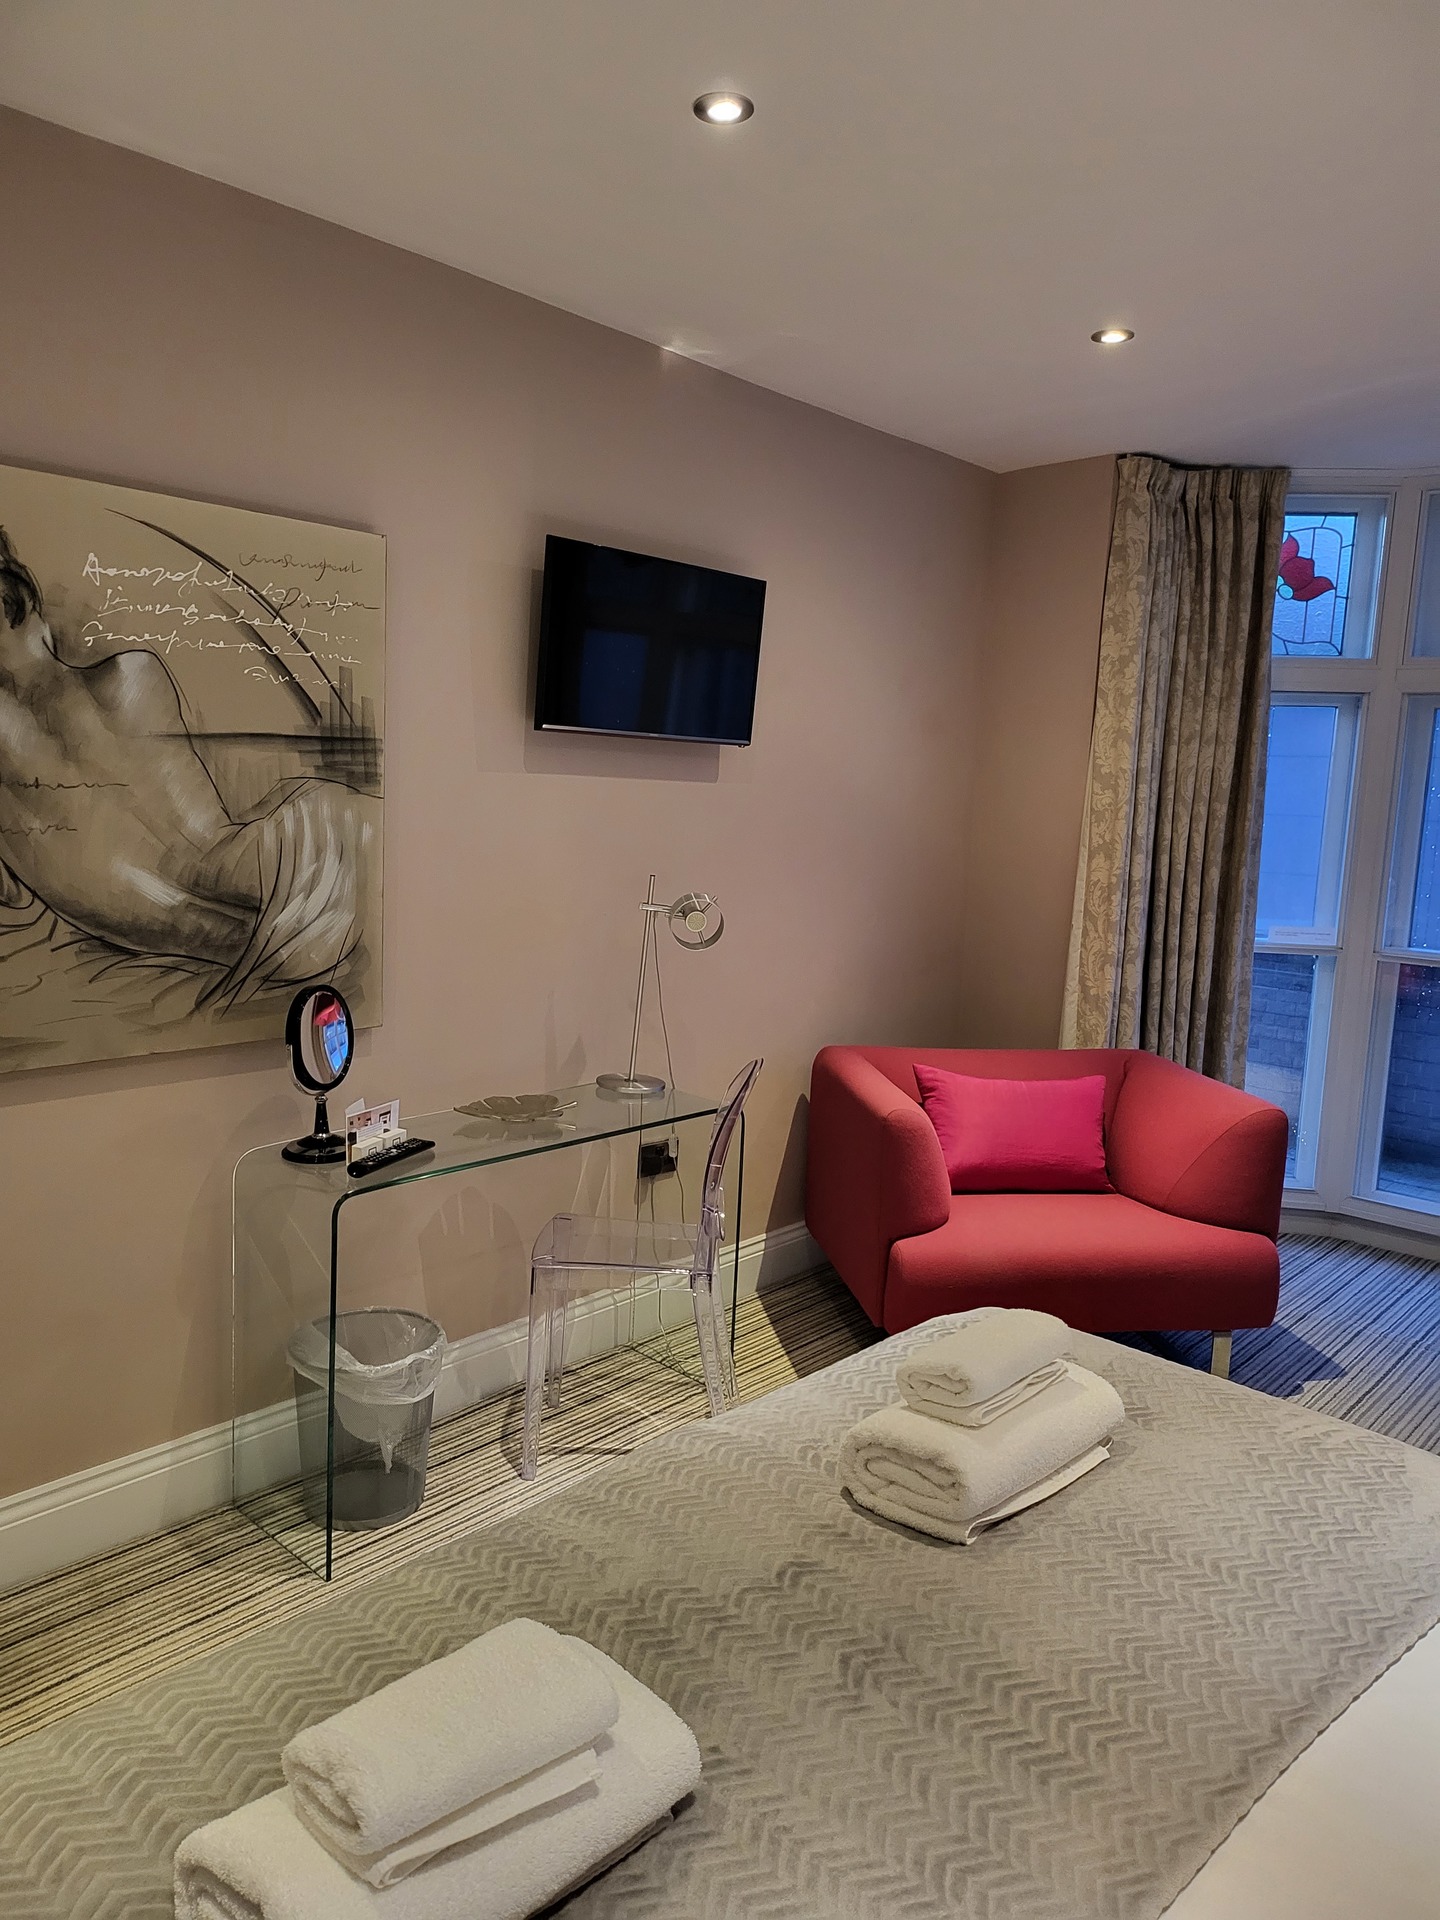 Harrogate Lifestyle Apartments Executive one bedroom apartment to rent in Harrogate town centre Kings Road